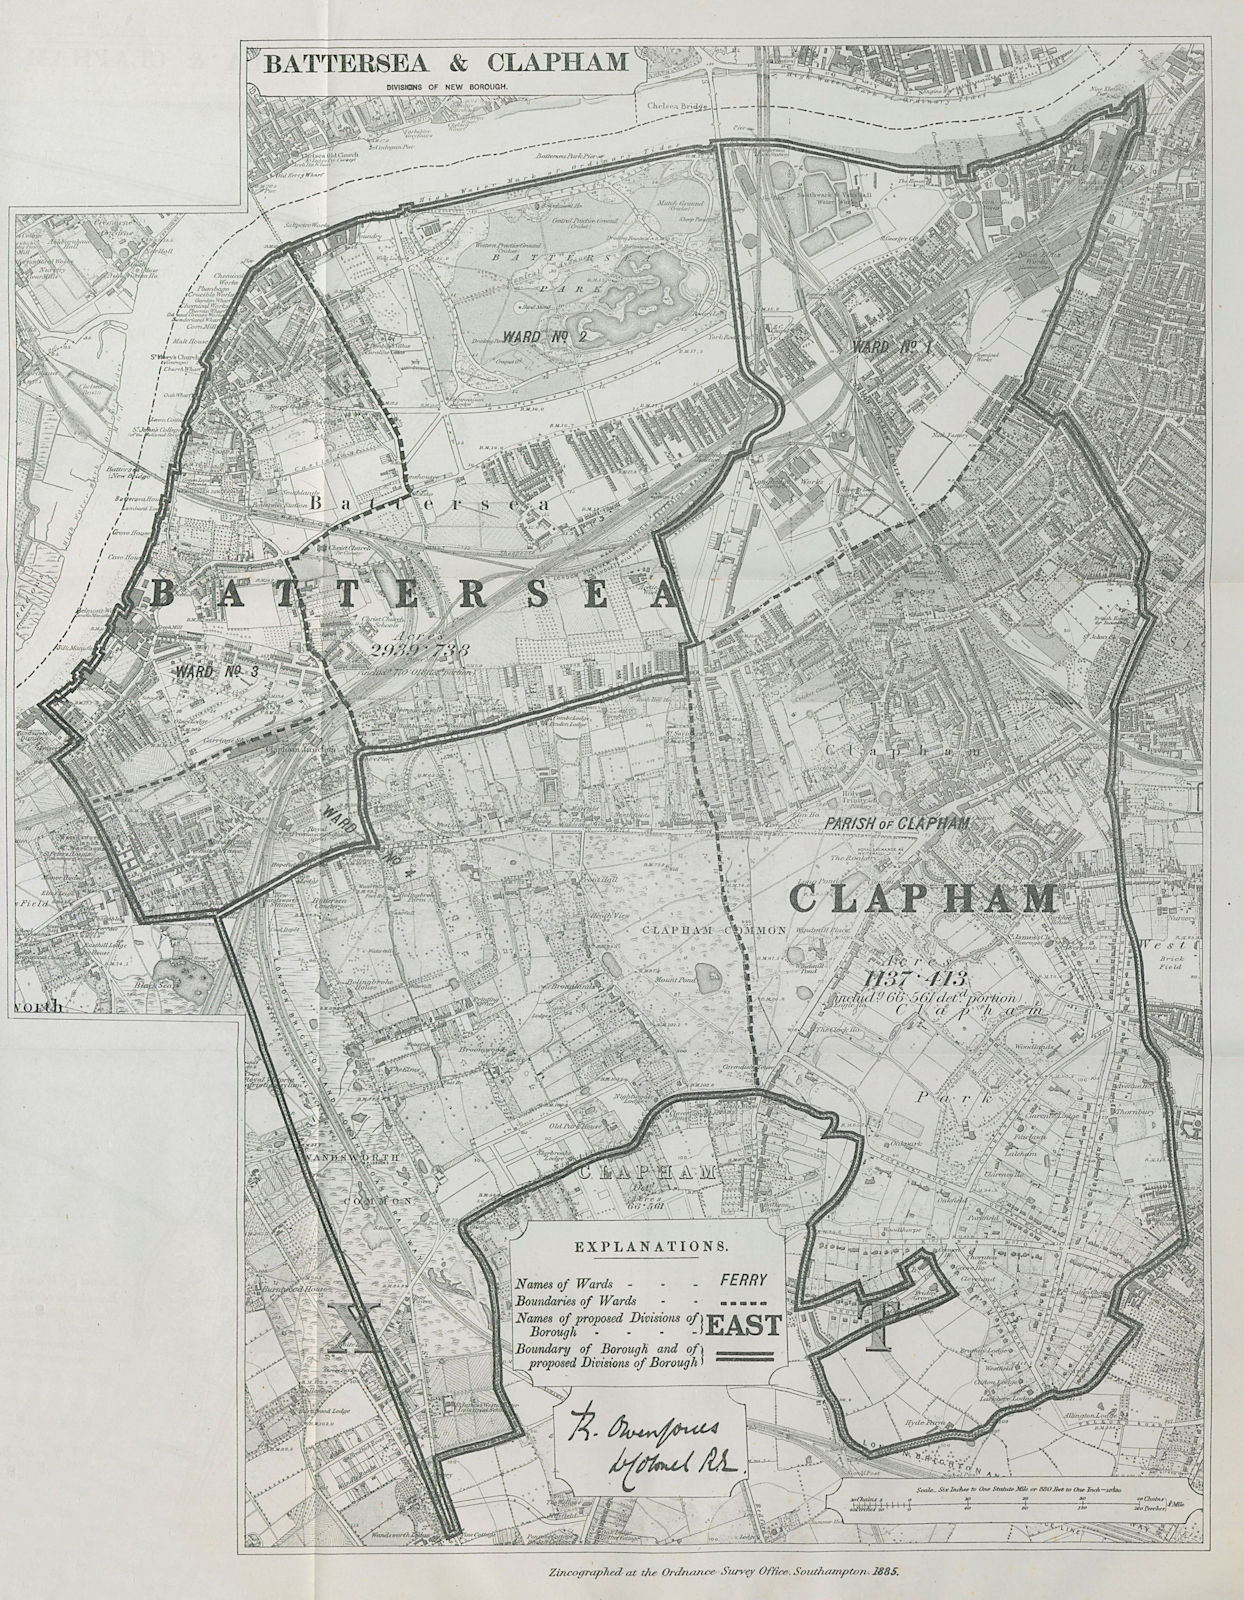 Battersea & Clapham Parliamentary Borough. BOUNDARY COMMISSION 1885 old map